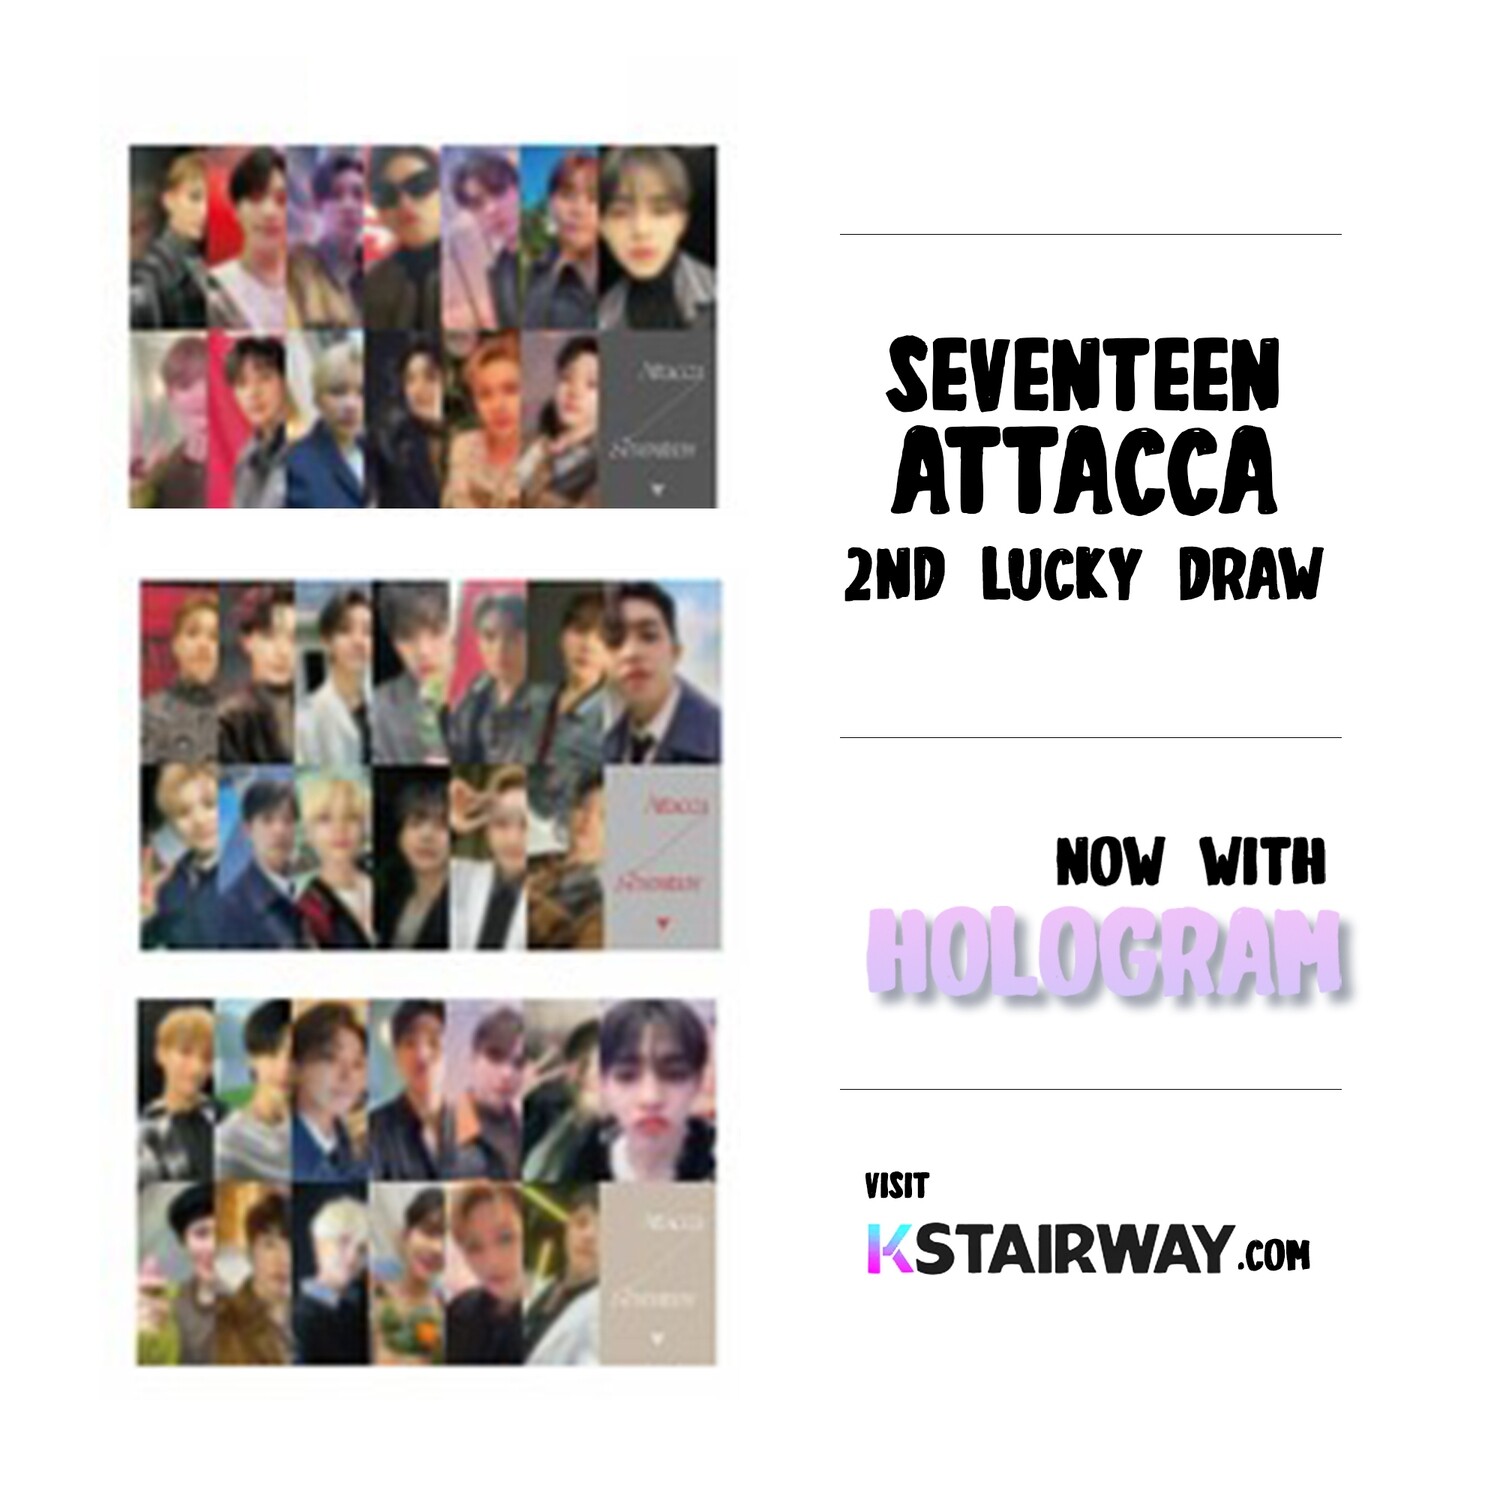 SEVENTEEN: ATTACCA - 2nd Lucky Draw Photocard